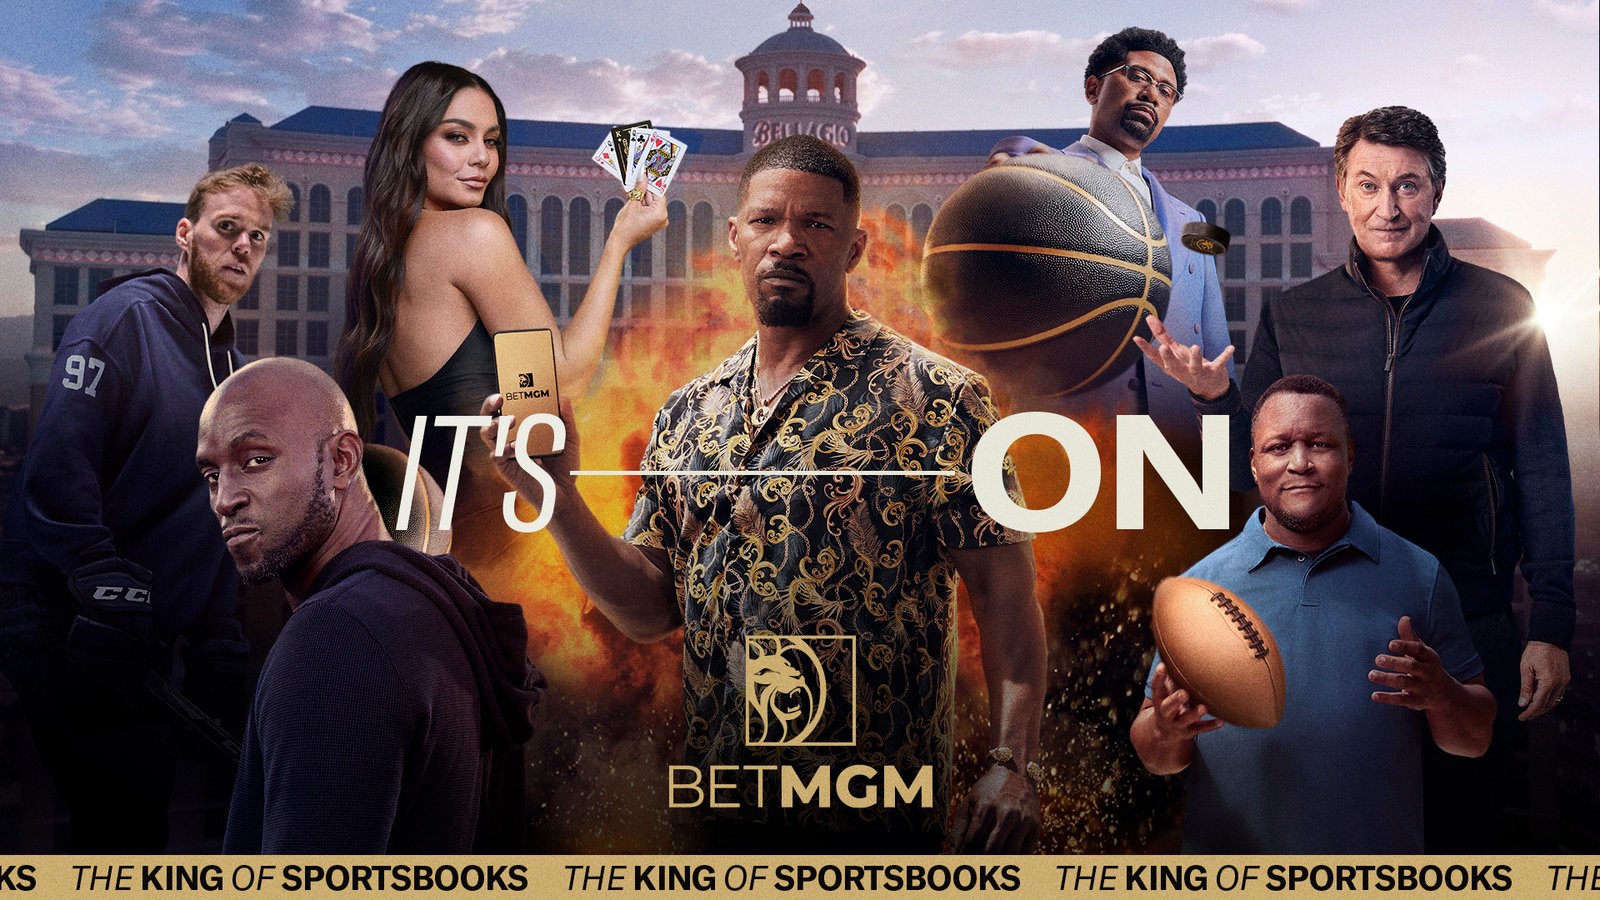 BetMGM to release new commercial campaign featuring brand ambassadors and celebrities nationwide on Thursday